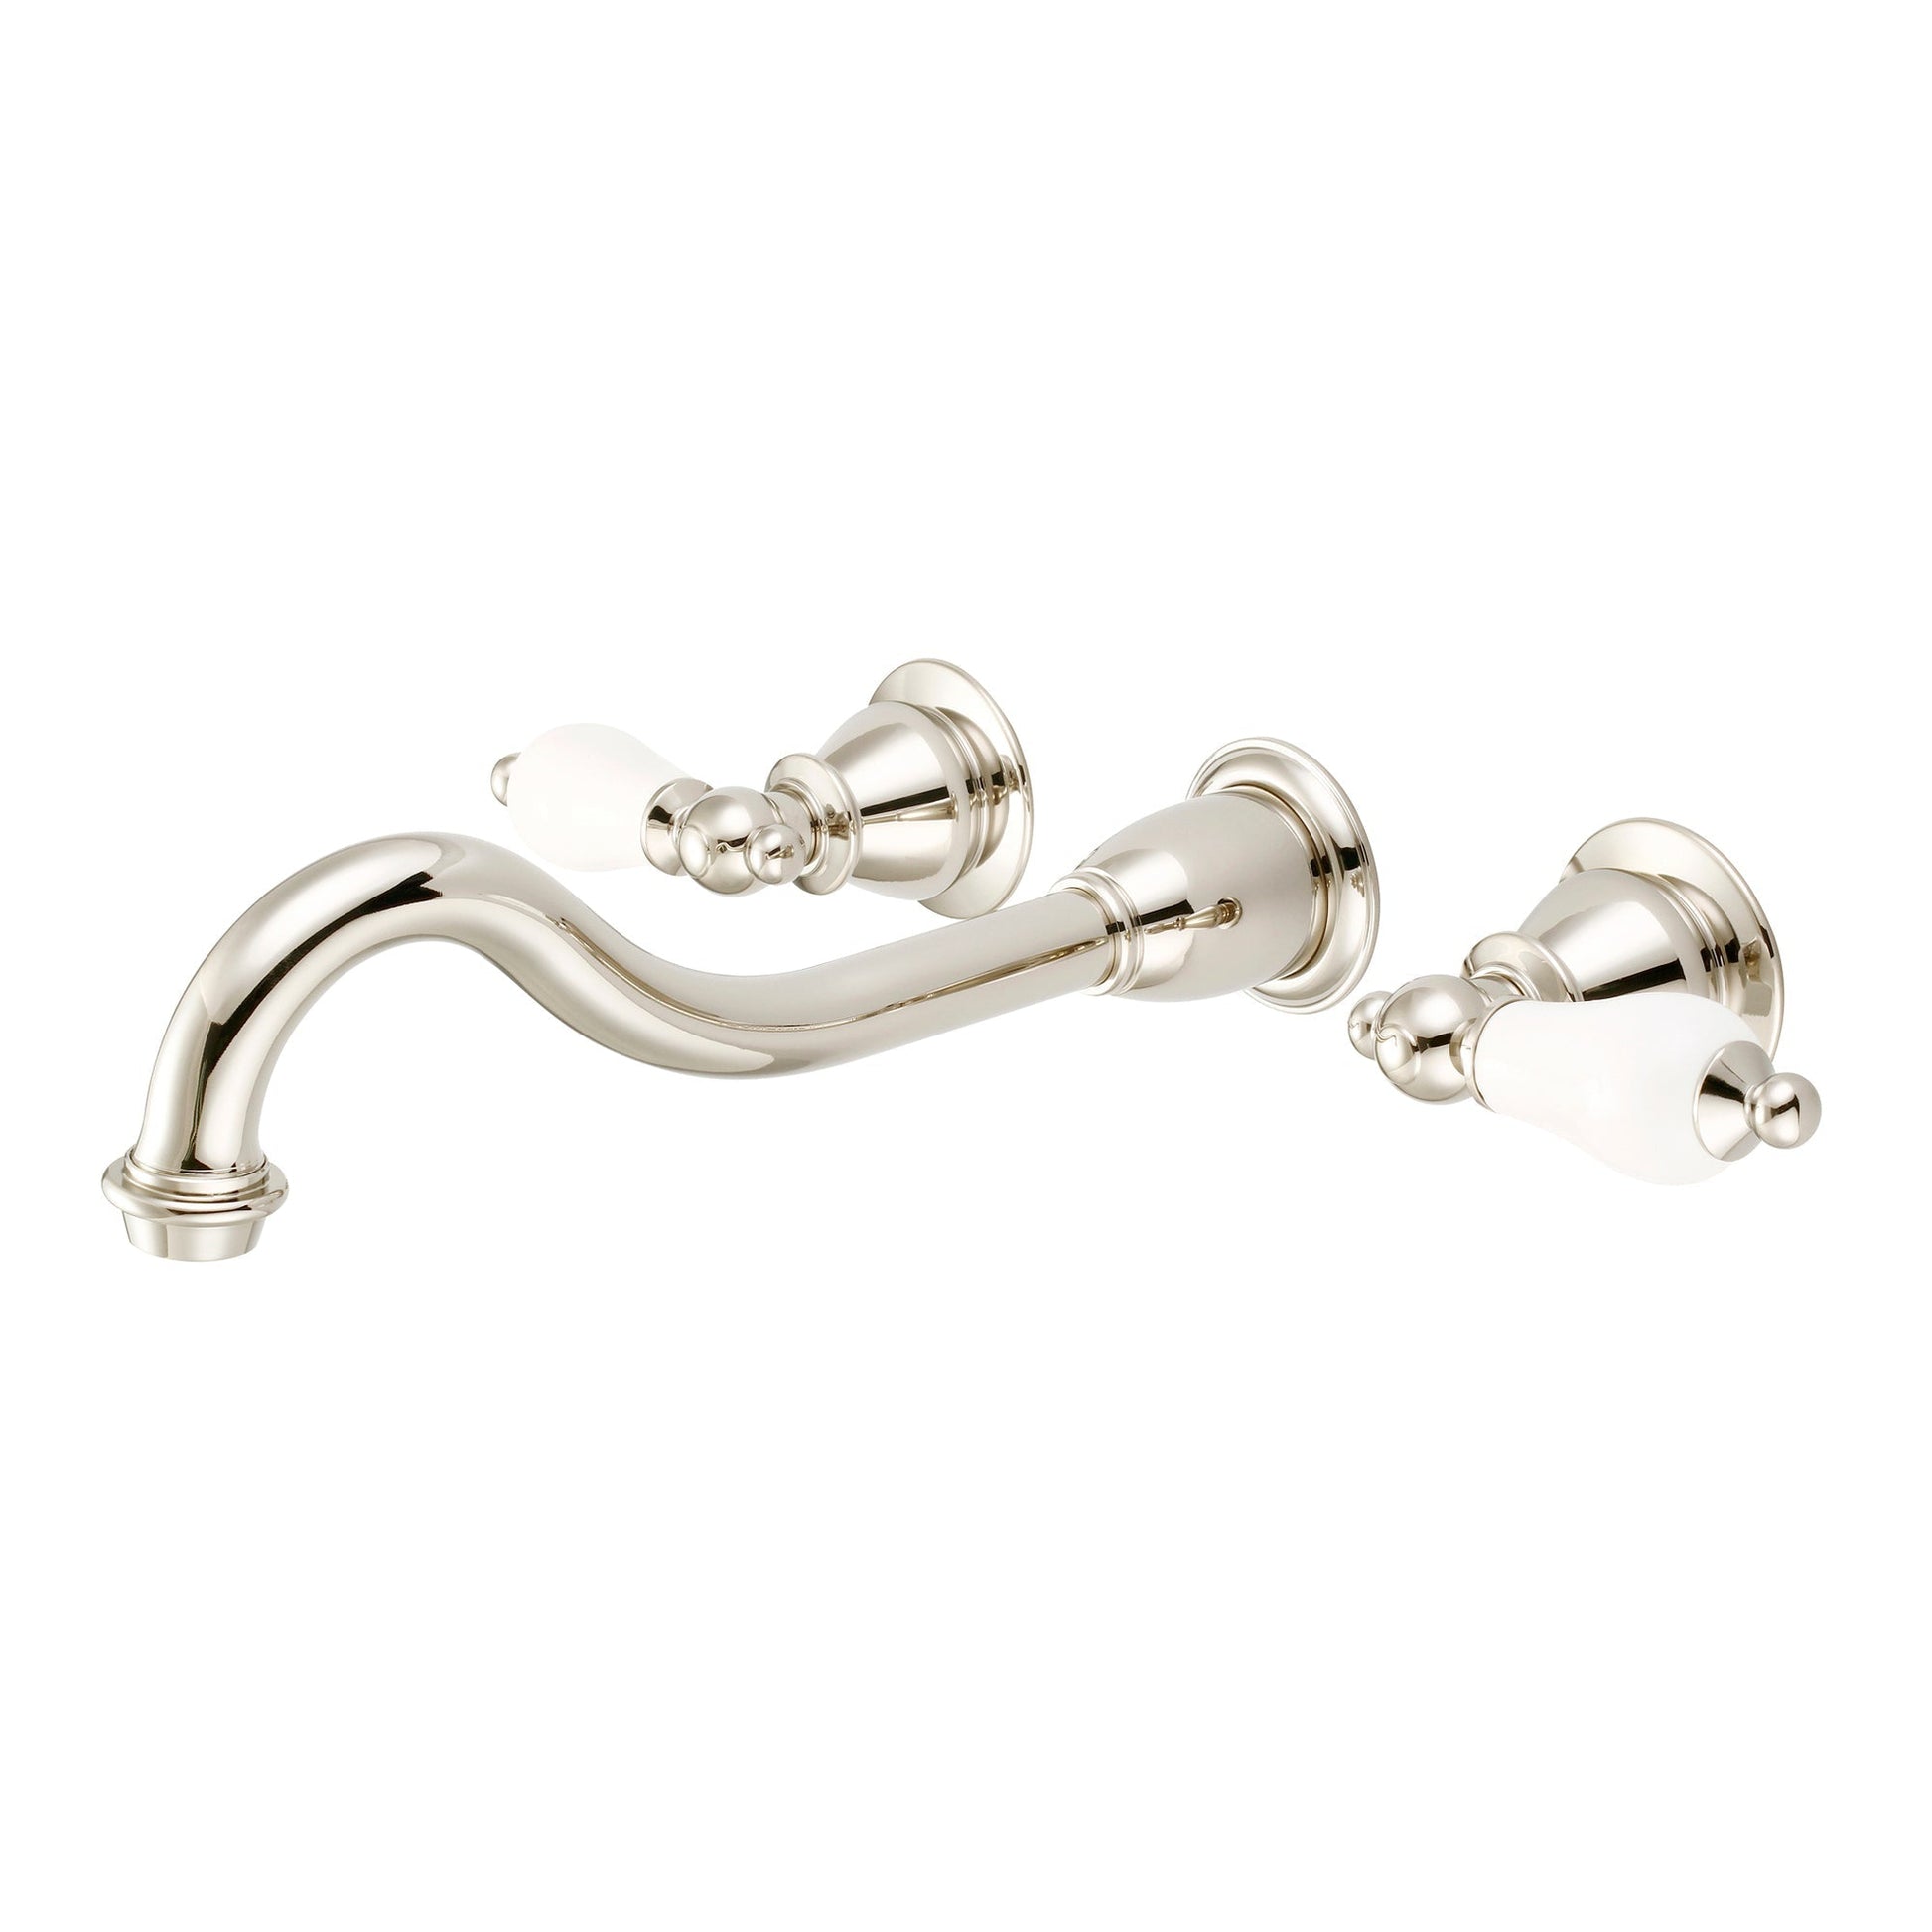 Water Creation Elegant Spout Wall Mount Vessel/Lavatory F4-0001 8" Ivory Solid Brass Faucet With Porcelain Lever Handles Without Labels